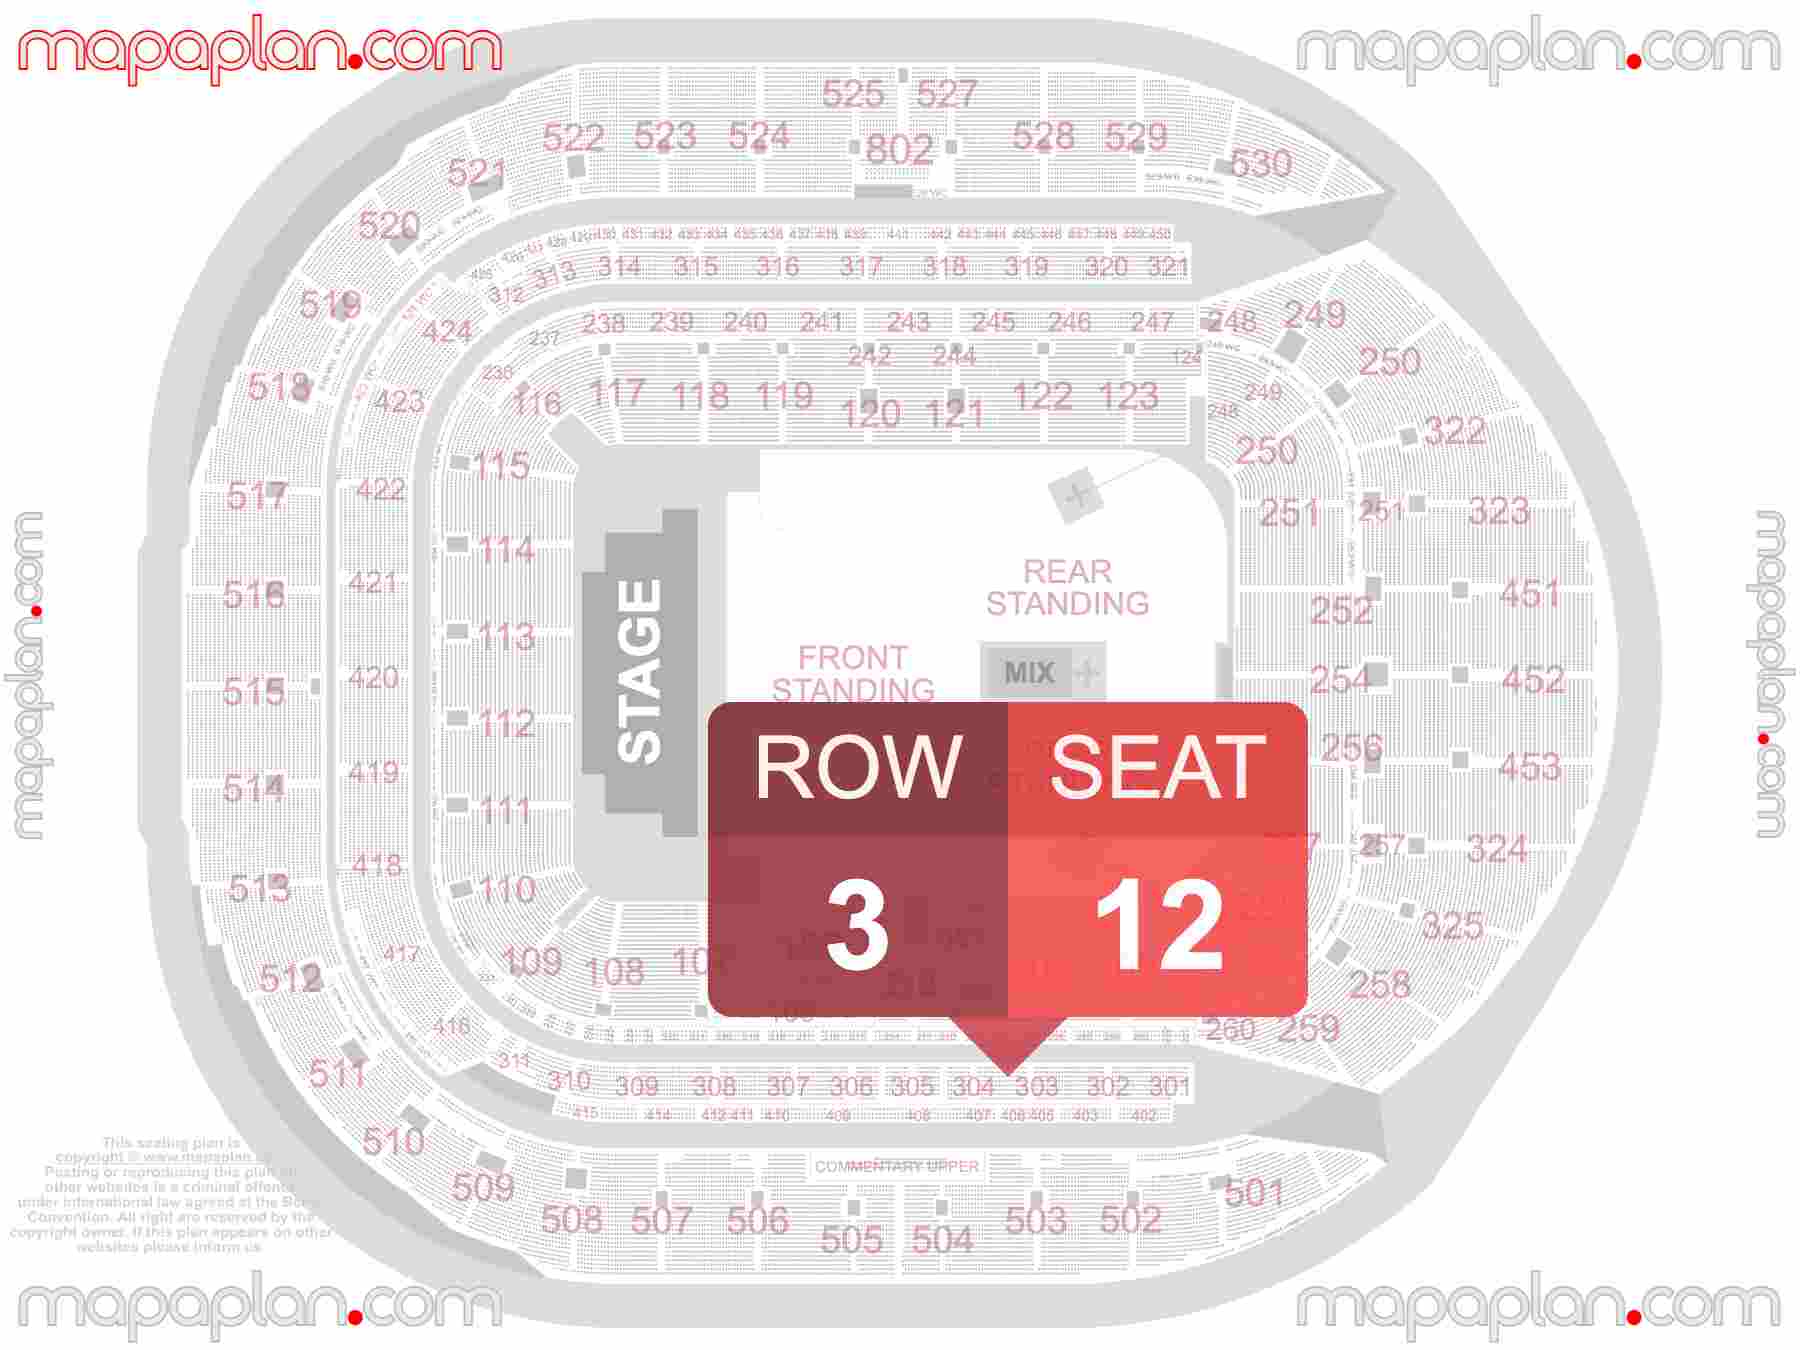 London Tottenham Hotspur Stadium seating plan Concert with PIT floor standing find best seats row numbering system chart showing how many seats per row - Individual 'find my seat' virtual locator